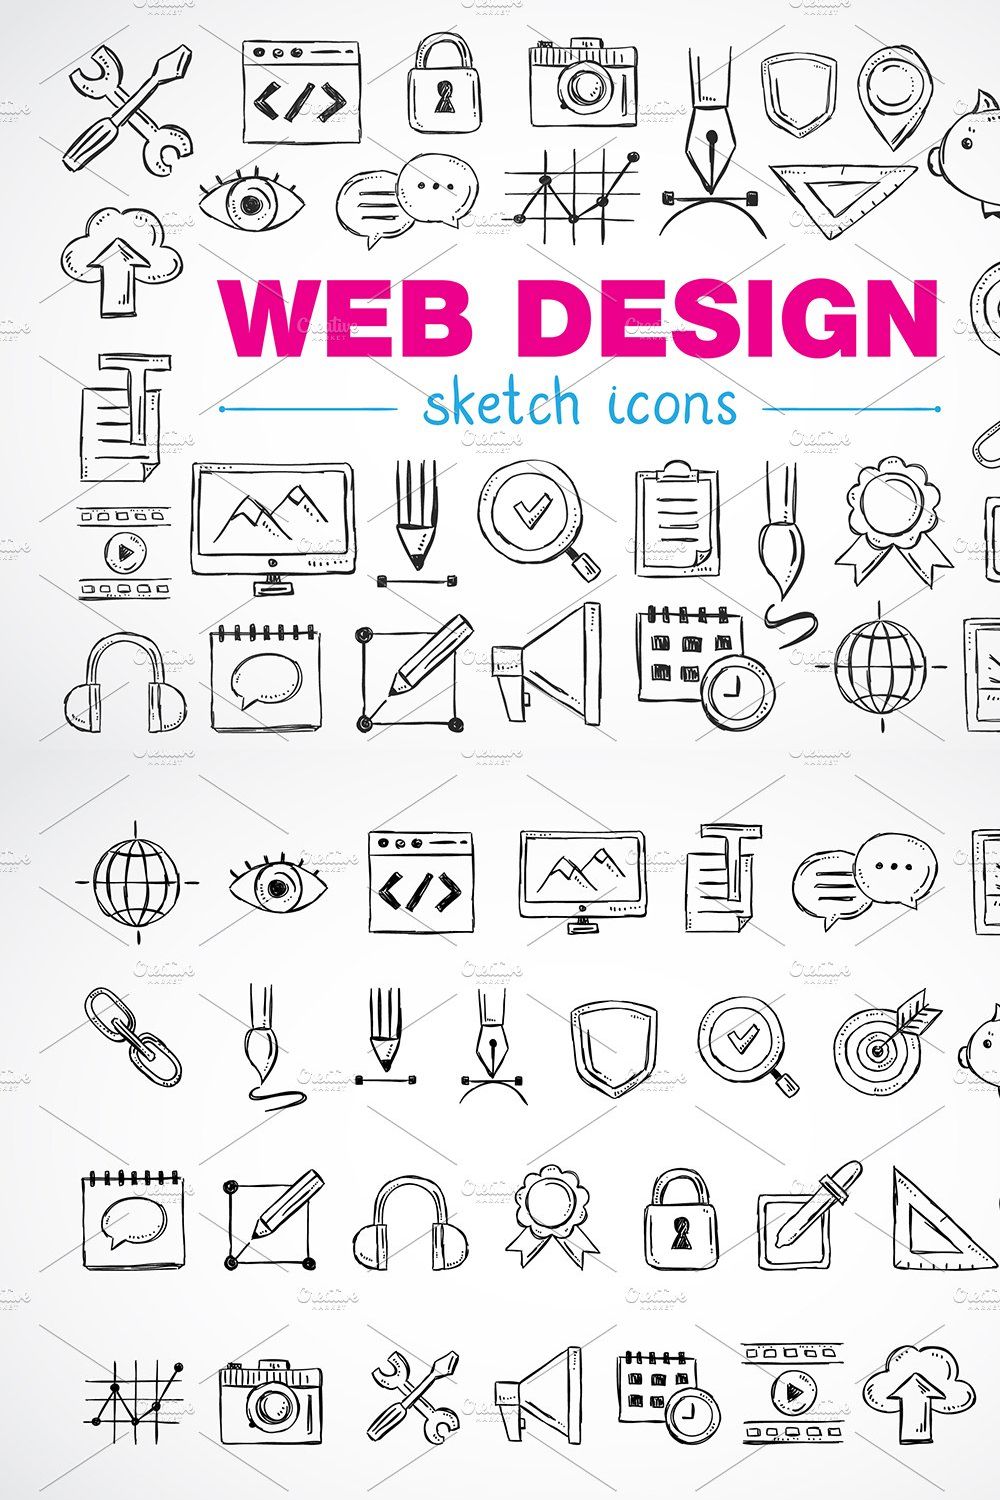 Web design sketch icons pinterest preview image.